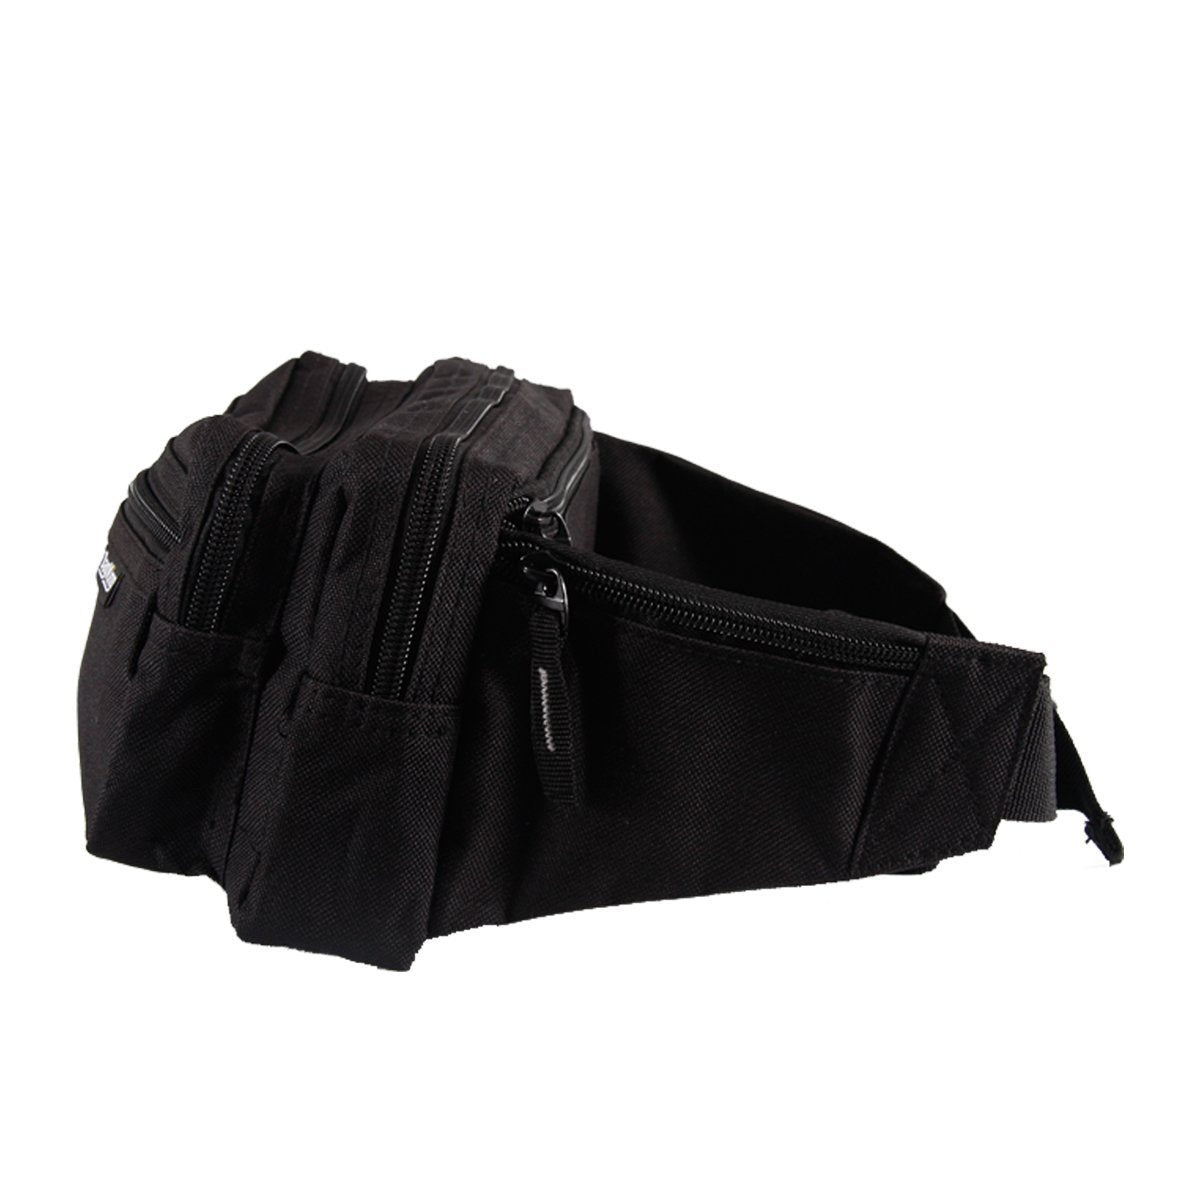 Bag King Deluxe Fanny Pack